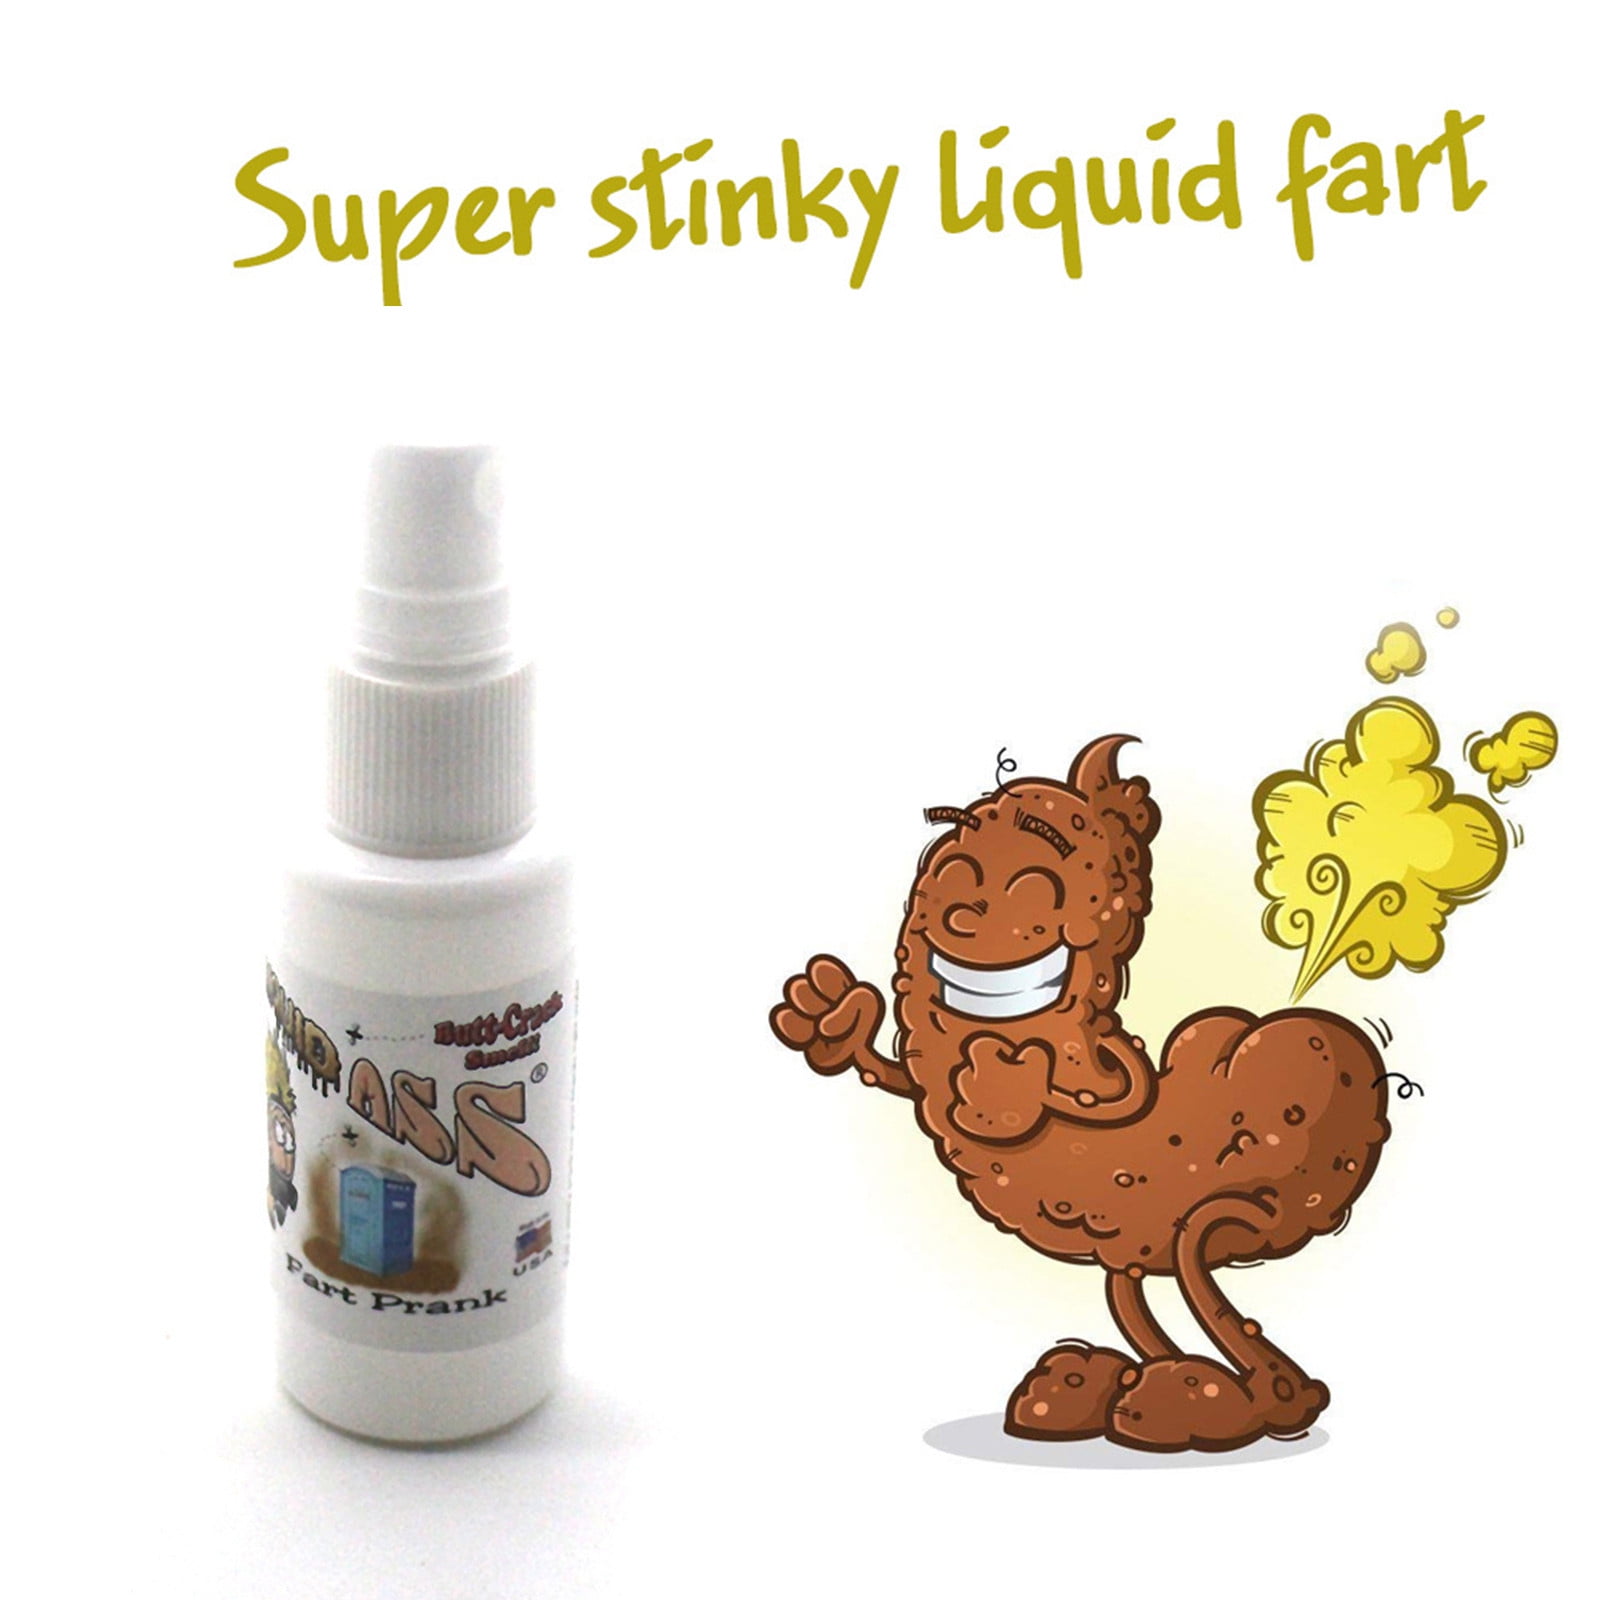 30ml Fart Gag Spray Party Supplies Plastic Smelly Stinky Gags for Adults  Kids Terrible Stinky Fart Spray Non Toxic for Halloween